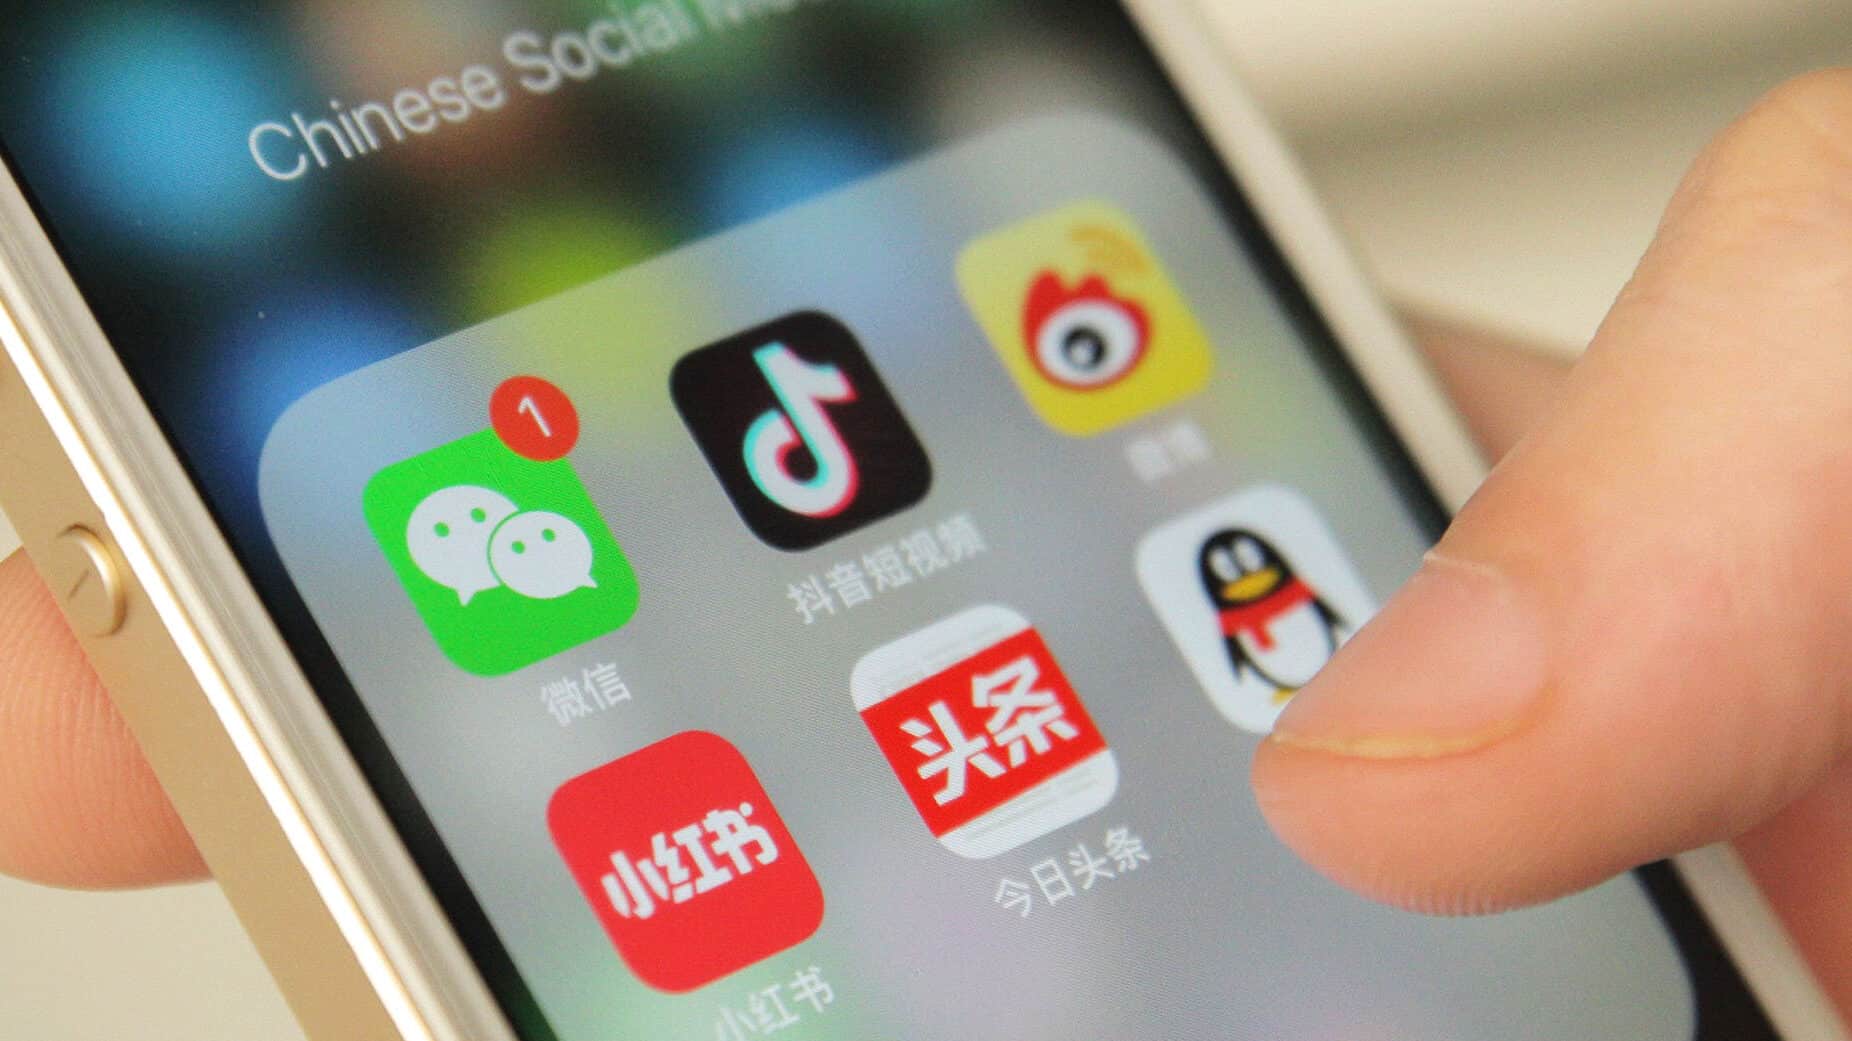 Chinese Social media apps